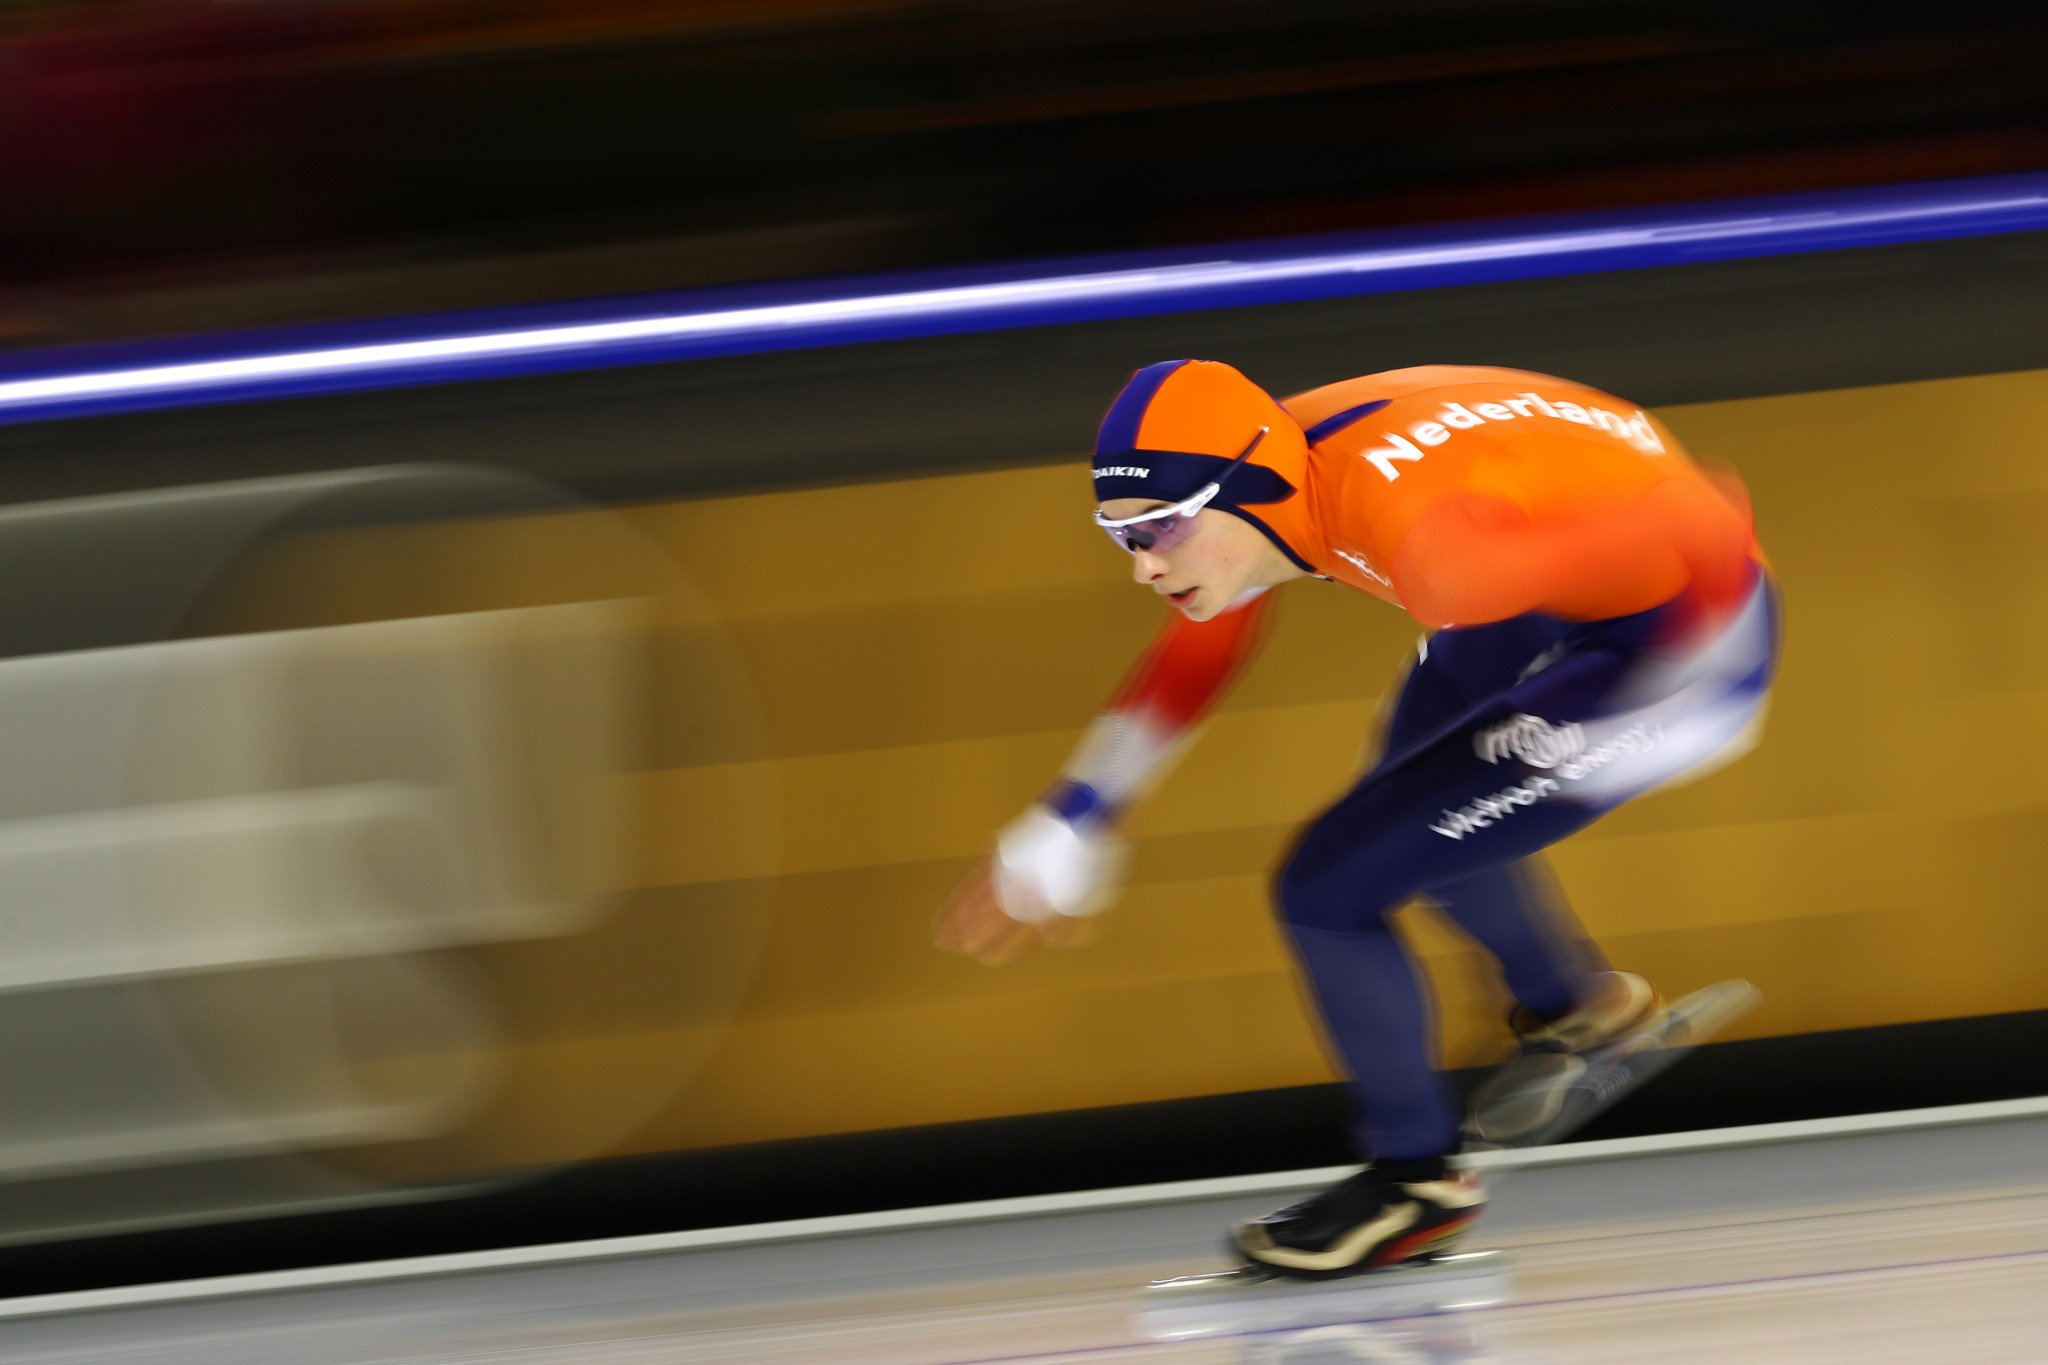 The Netherlands' Femke Kok was in fine form on day one of the ISU World Junior Speed Skating Championships in Tomaszów Mazowiecki ©Getty Images